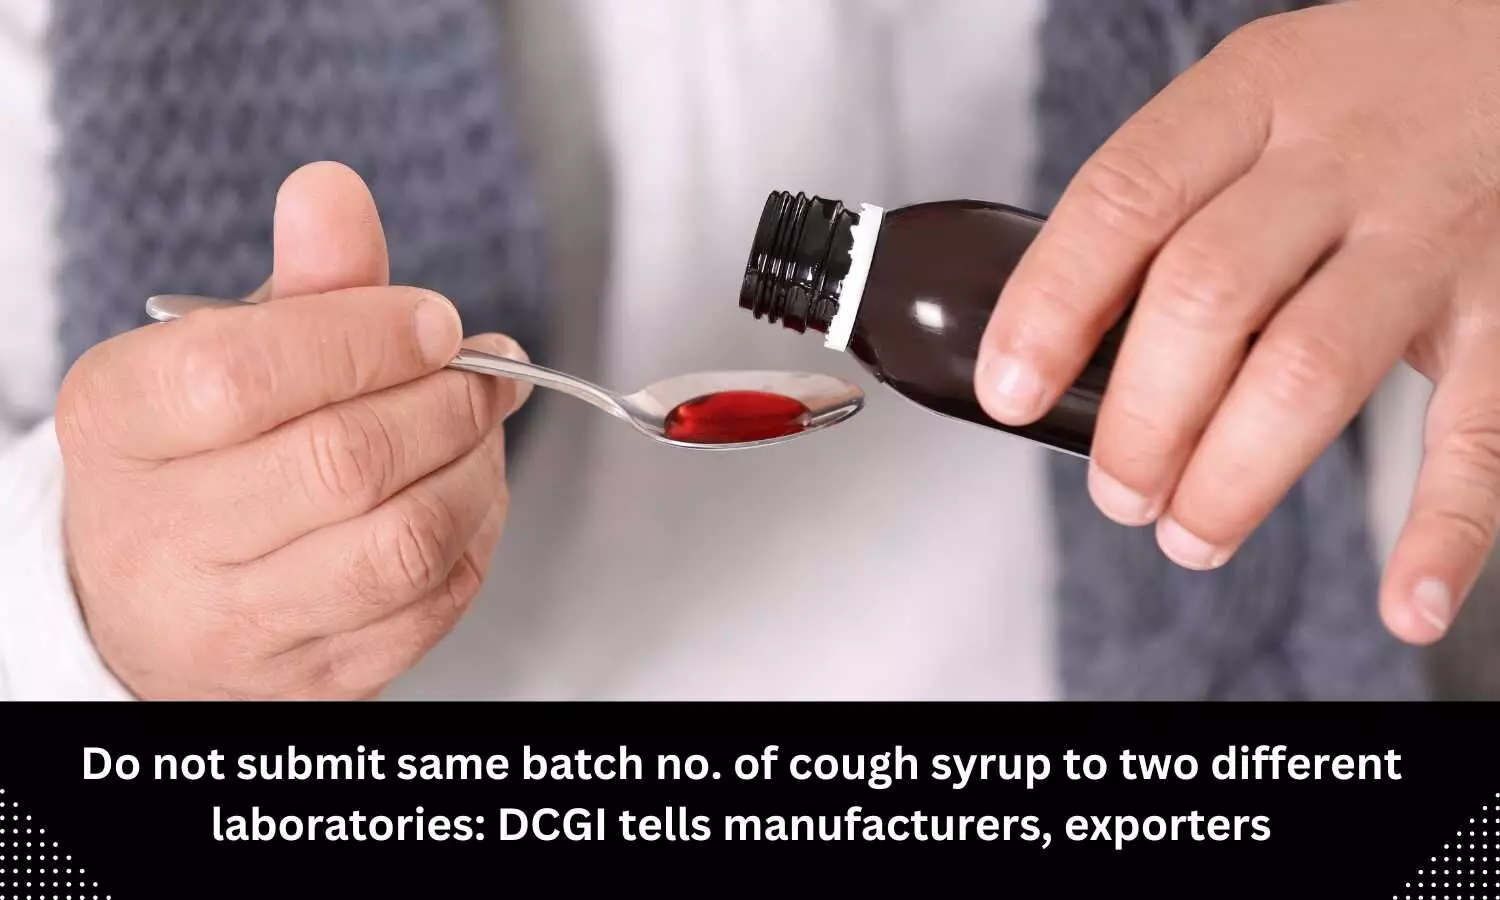 DCGI tells manufacturers, exporters not to submit same batch no. of cough syrup to two different laboratories